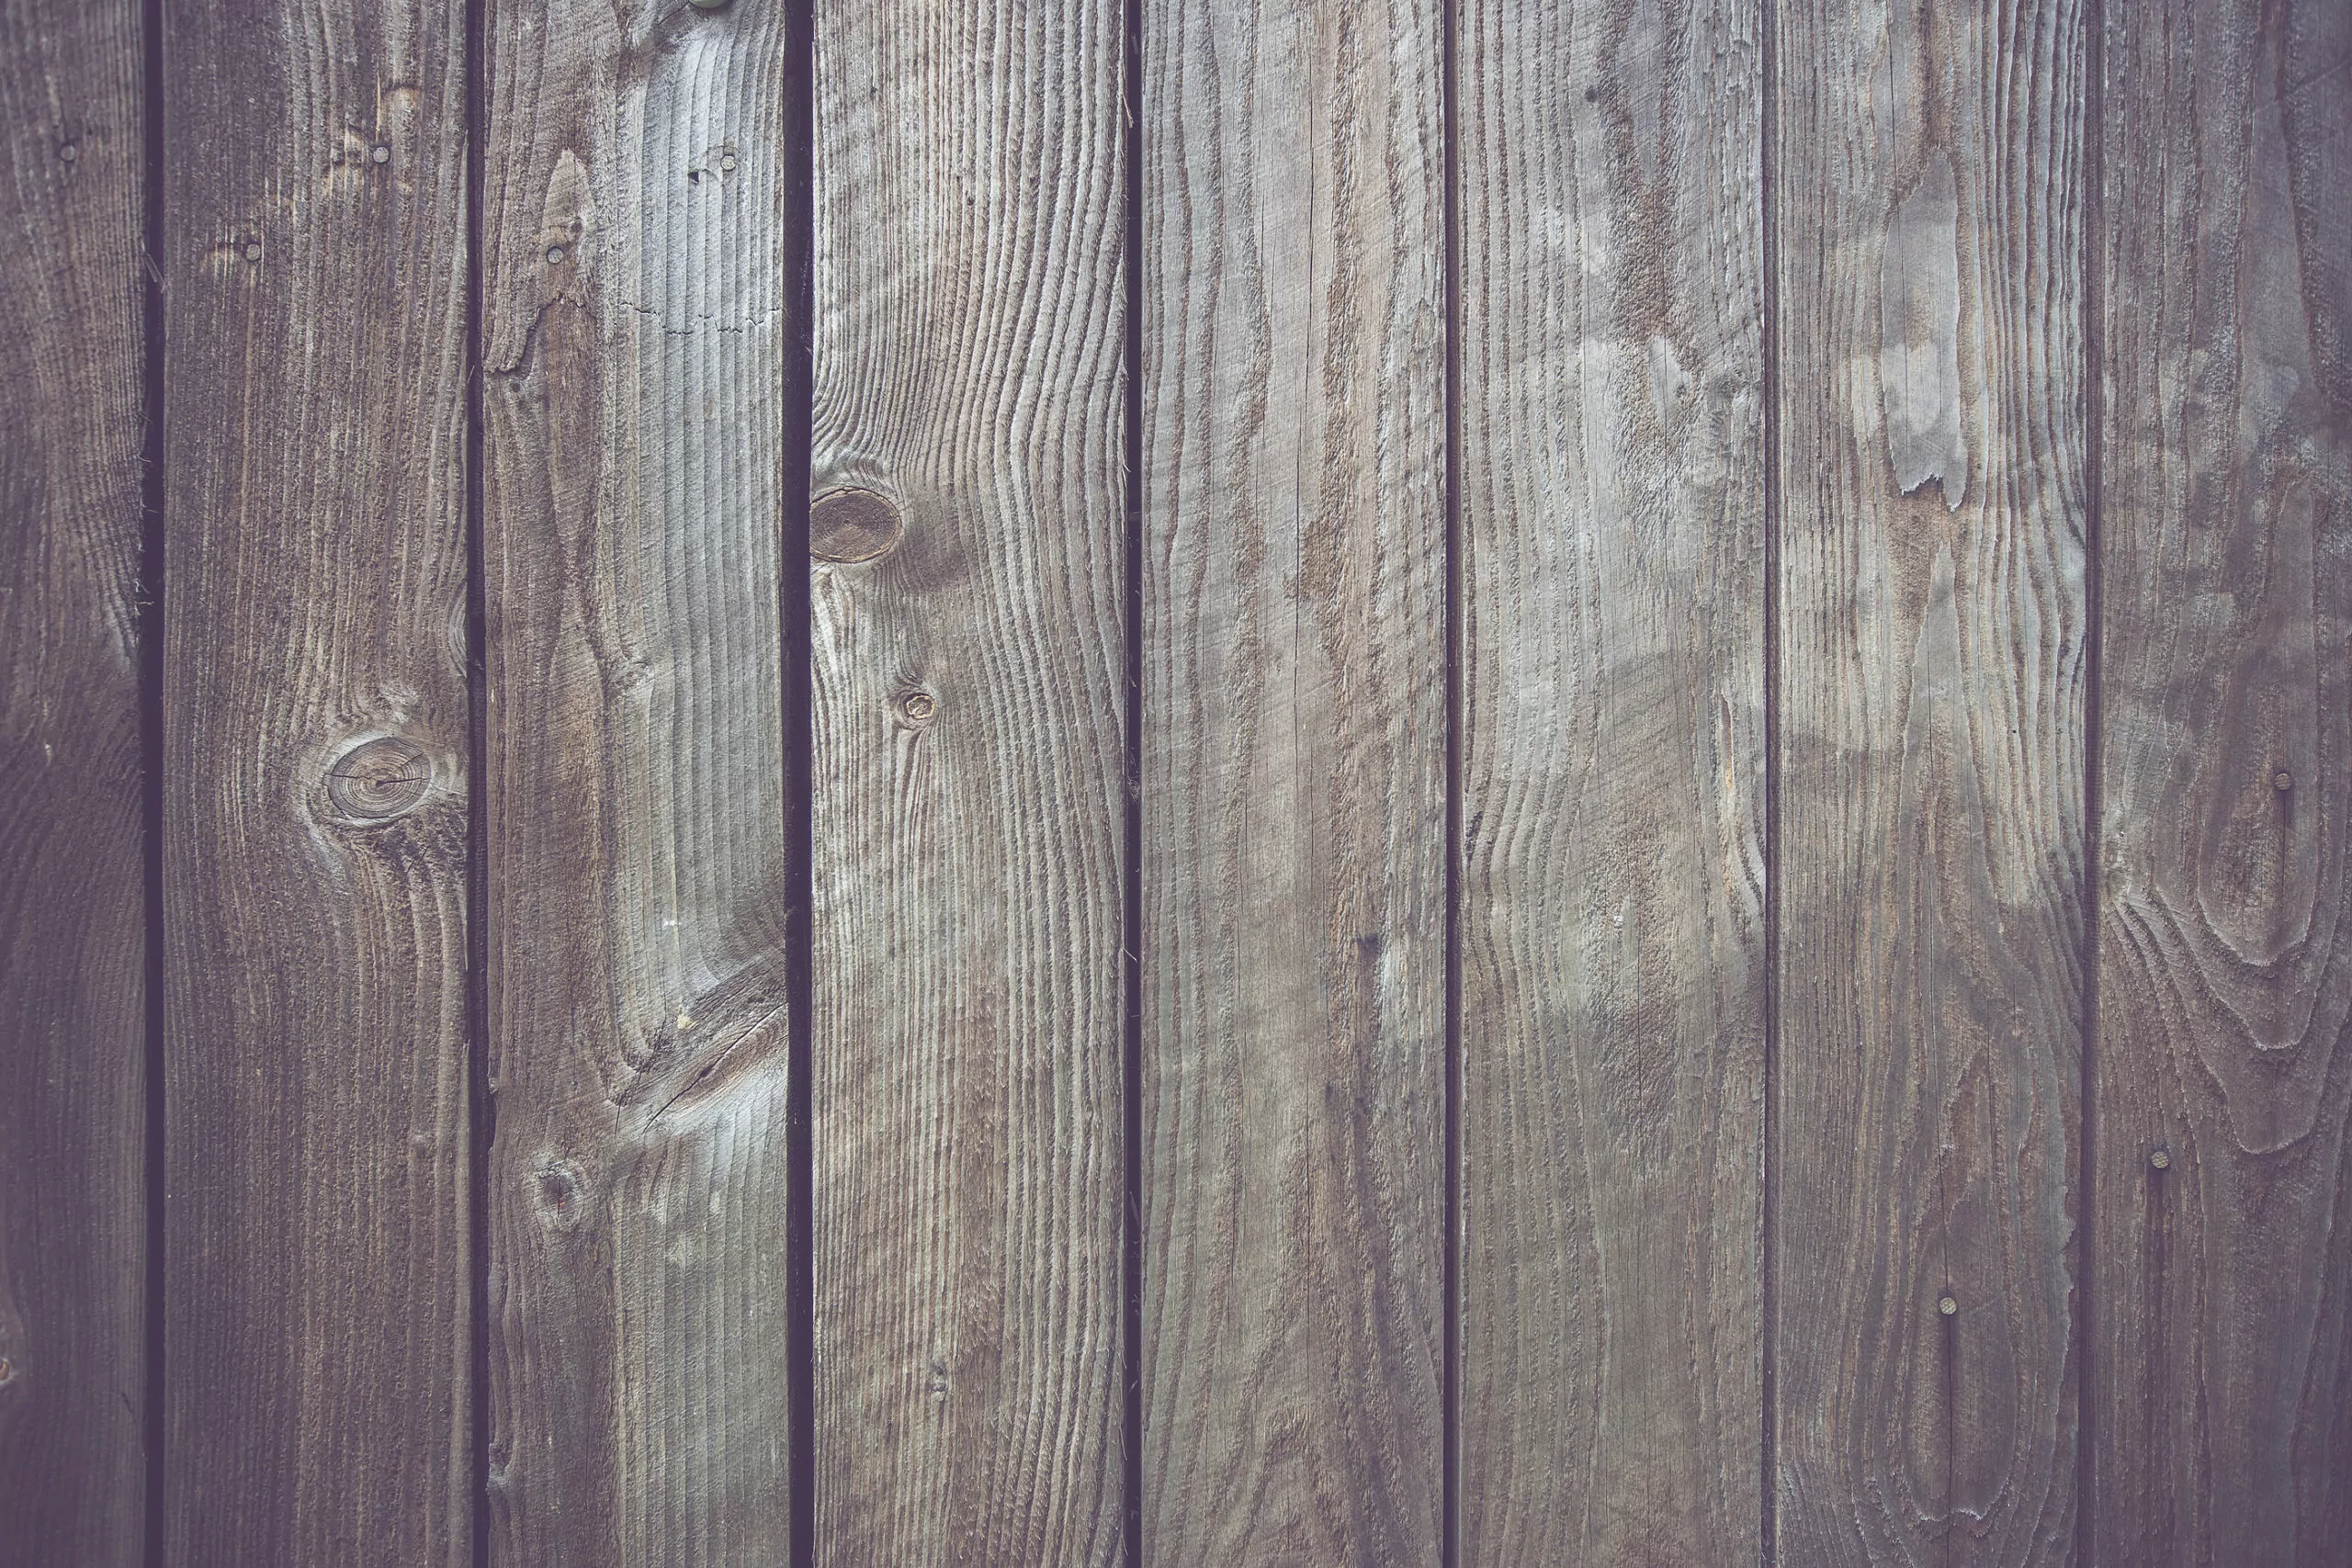 Wooden board background to illustrate How to Replace a Wooden Fence Panel